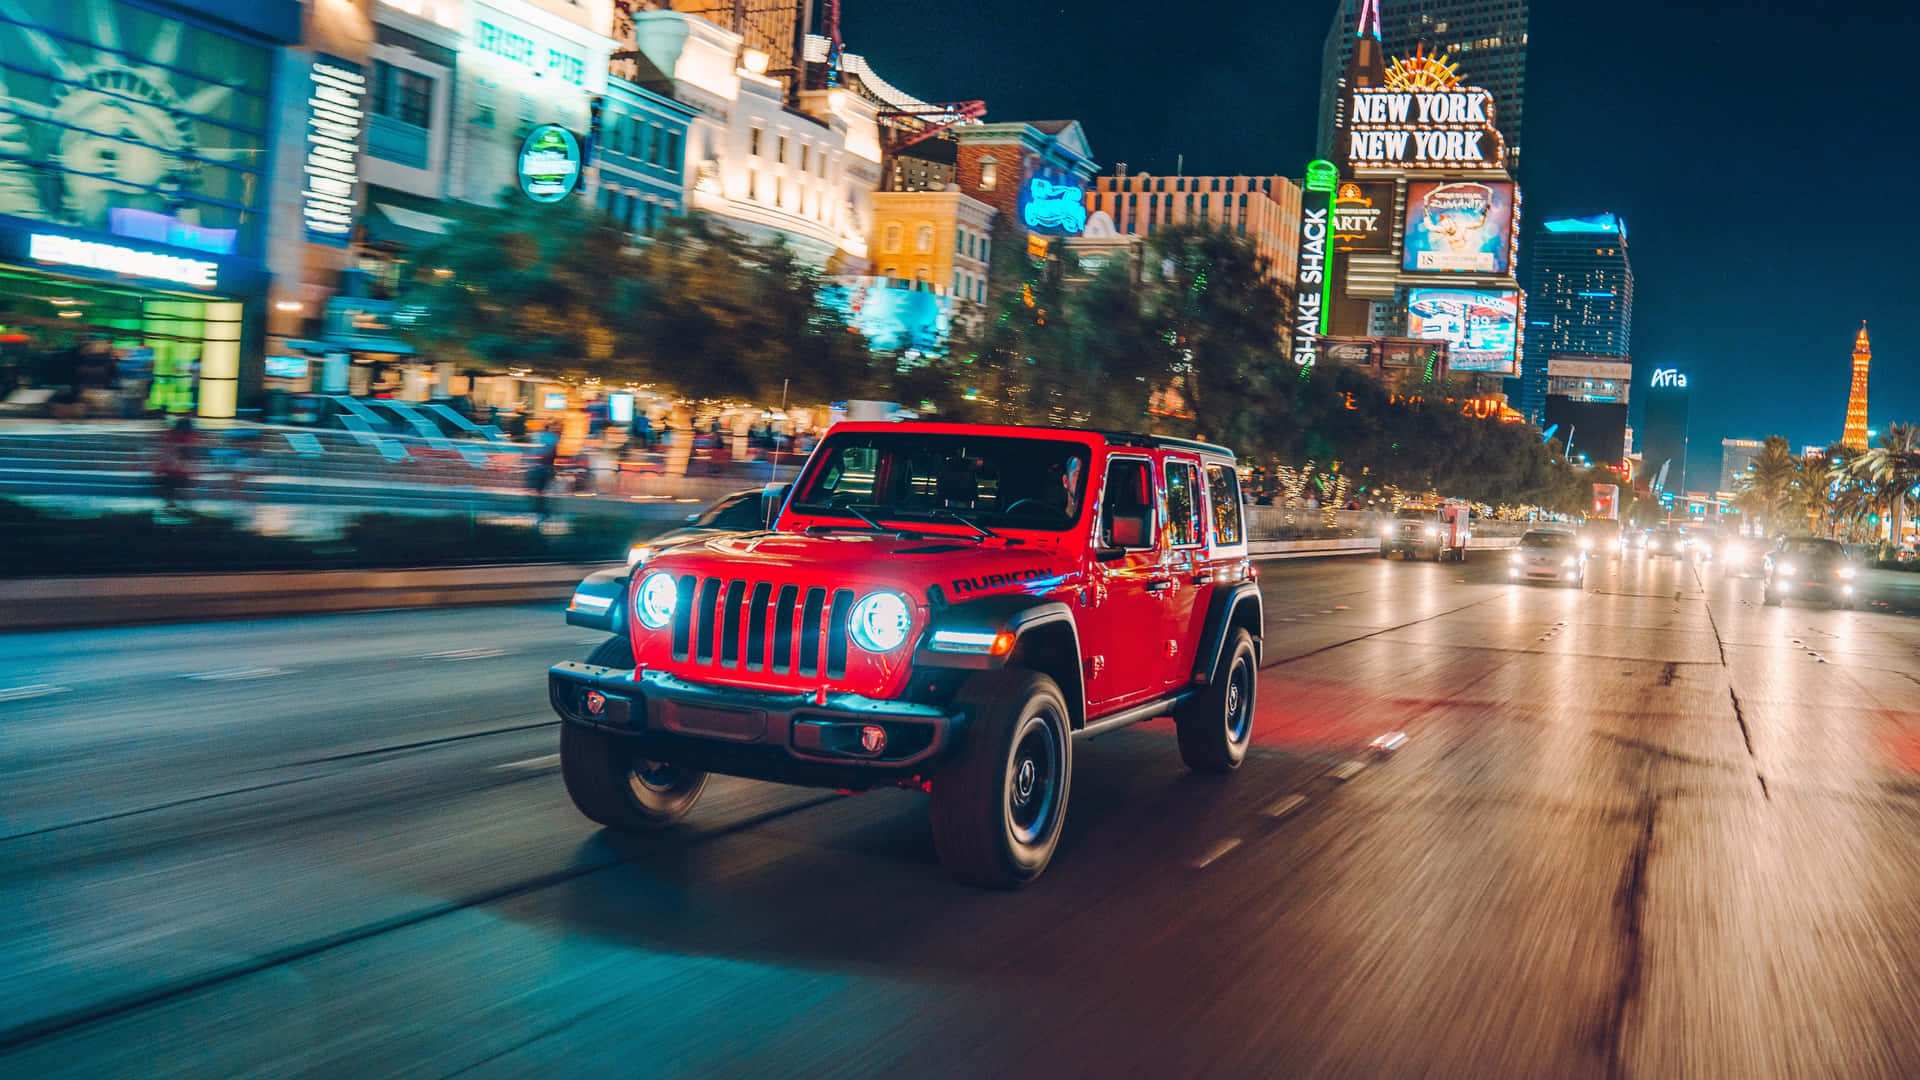 A Red Jeep Wrangler Driving Down A City Street At Night